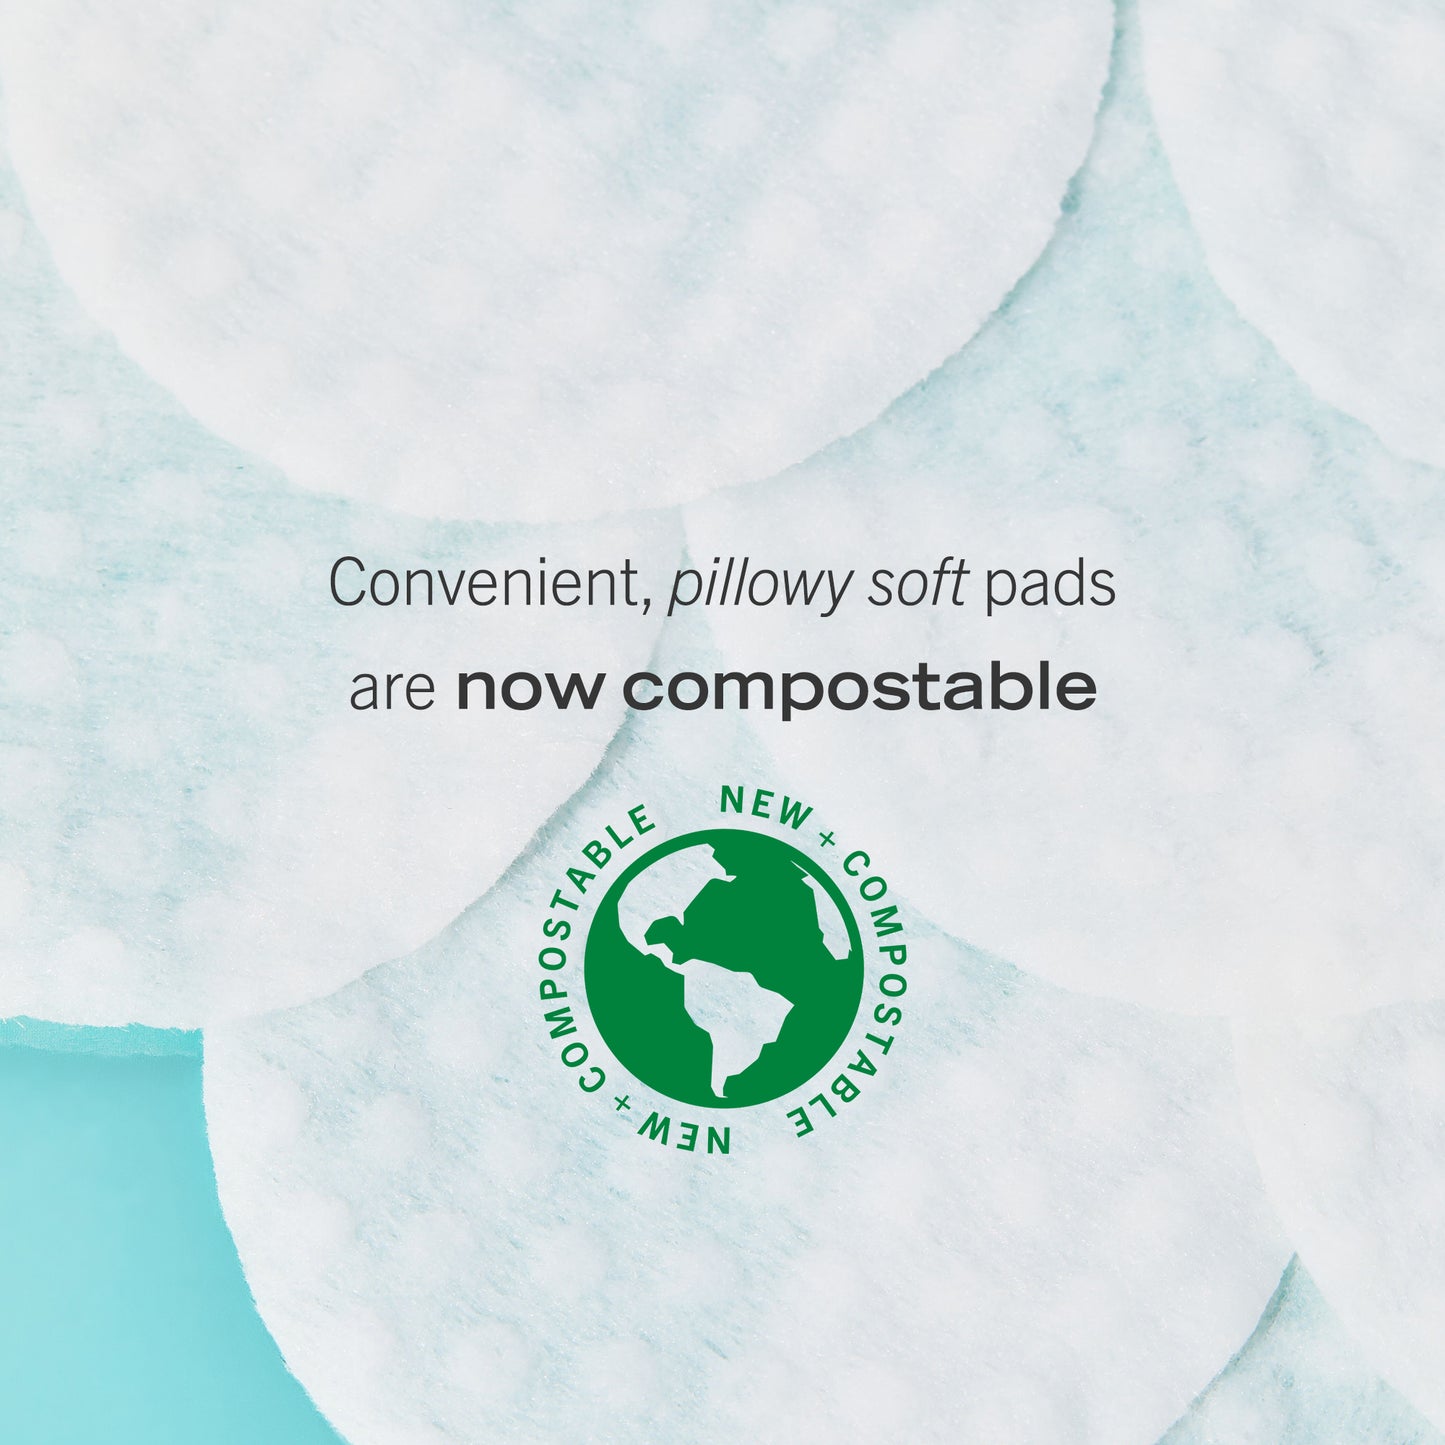 Convenient, pillowy soft pads are now compostable.